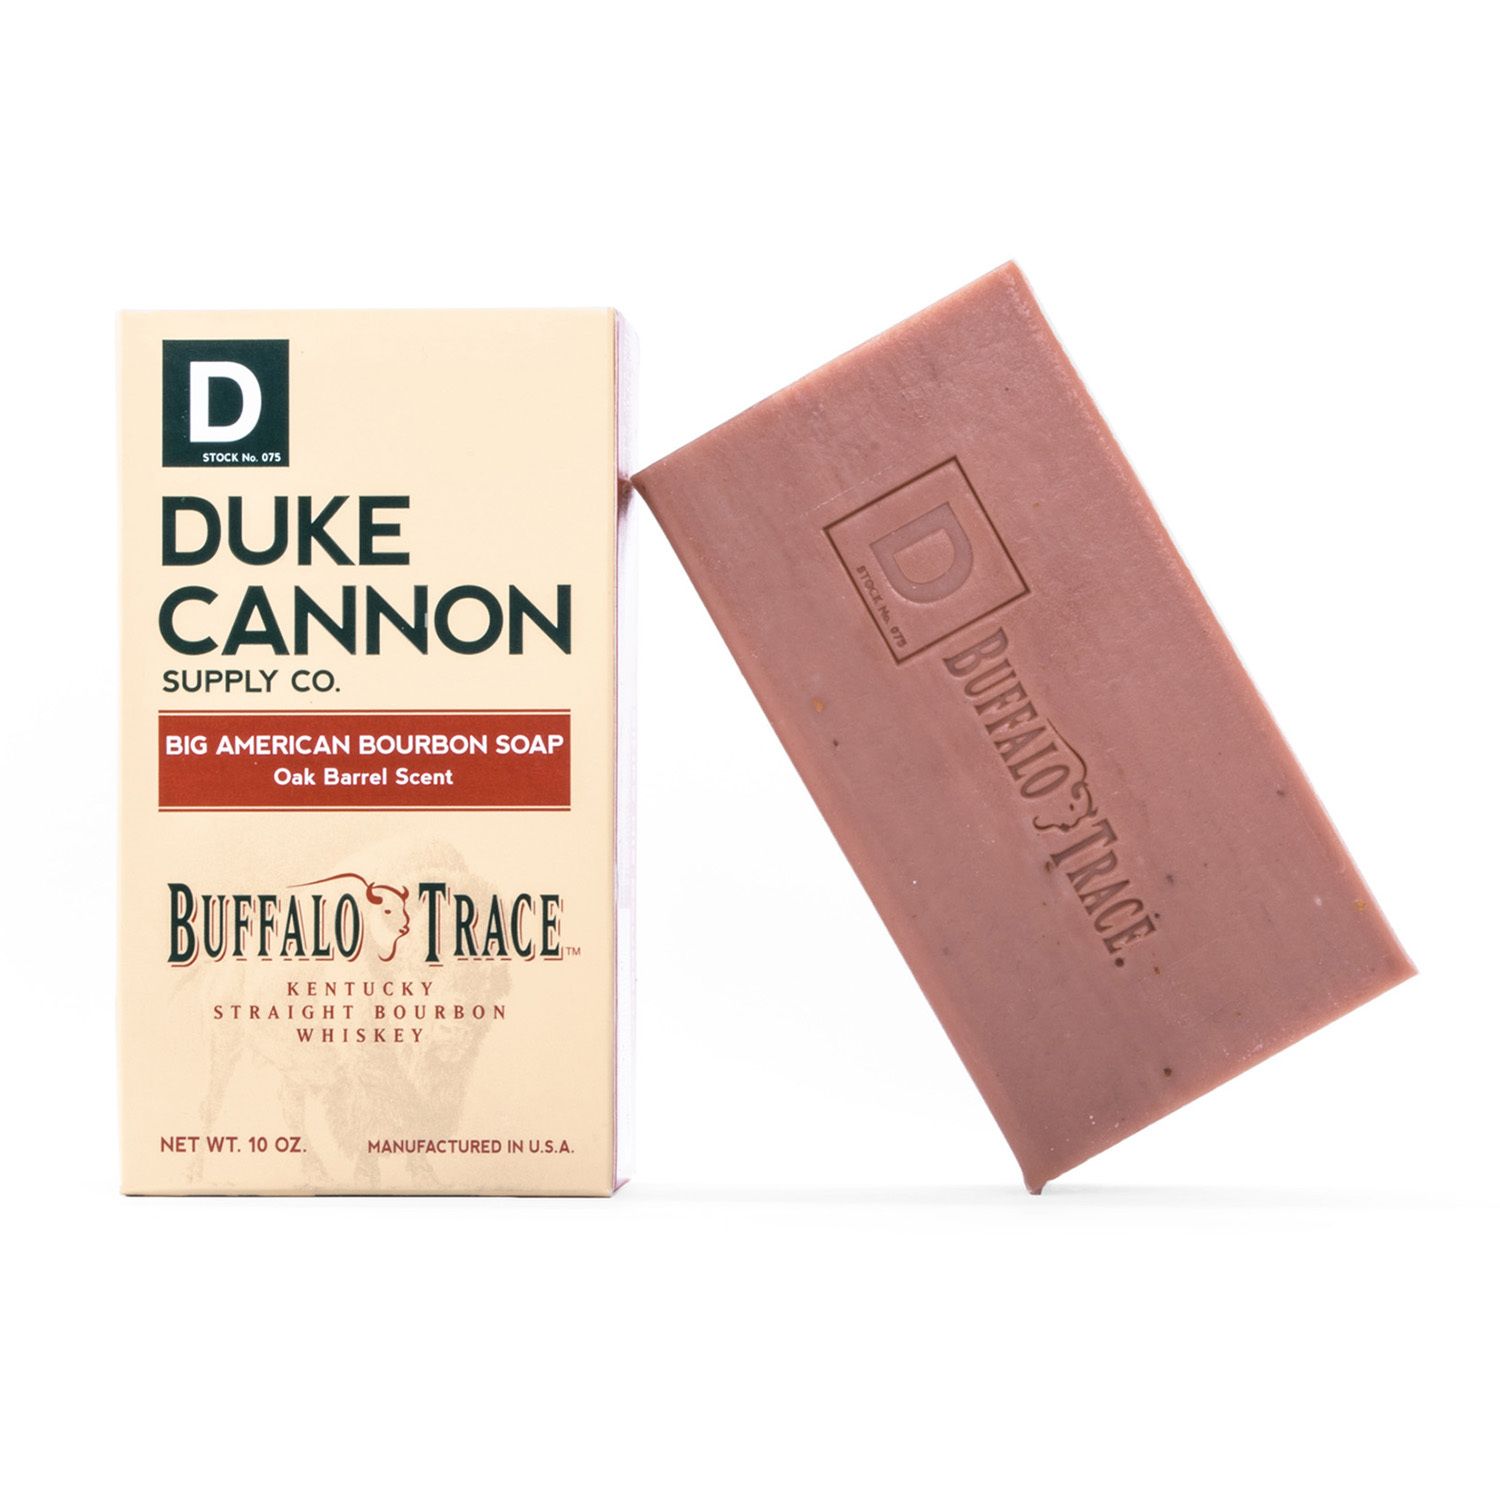 Image for Duke Cannon Supply Co. Big American Bourbon Bar Soap at Kohl's.